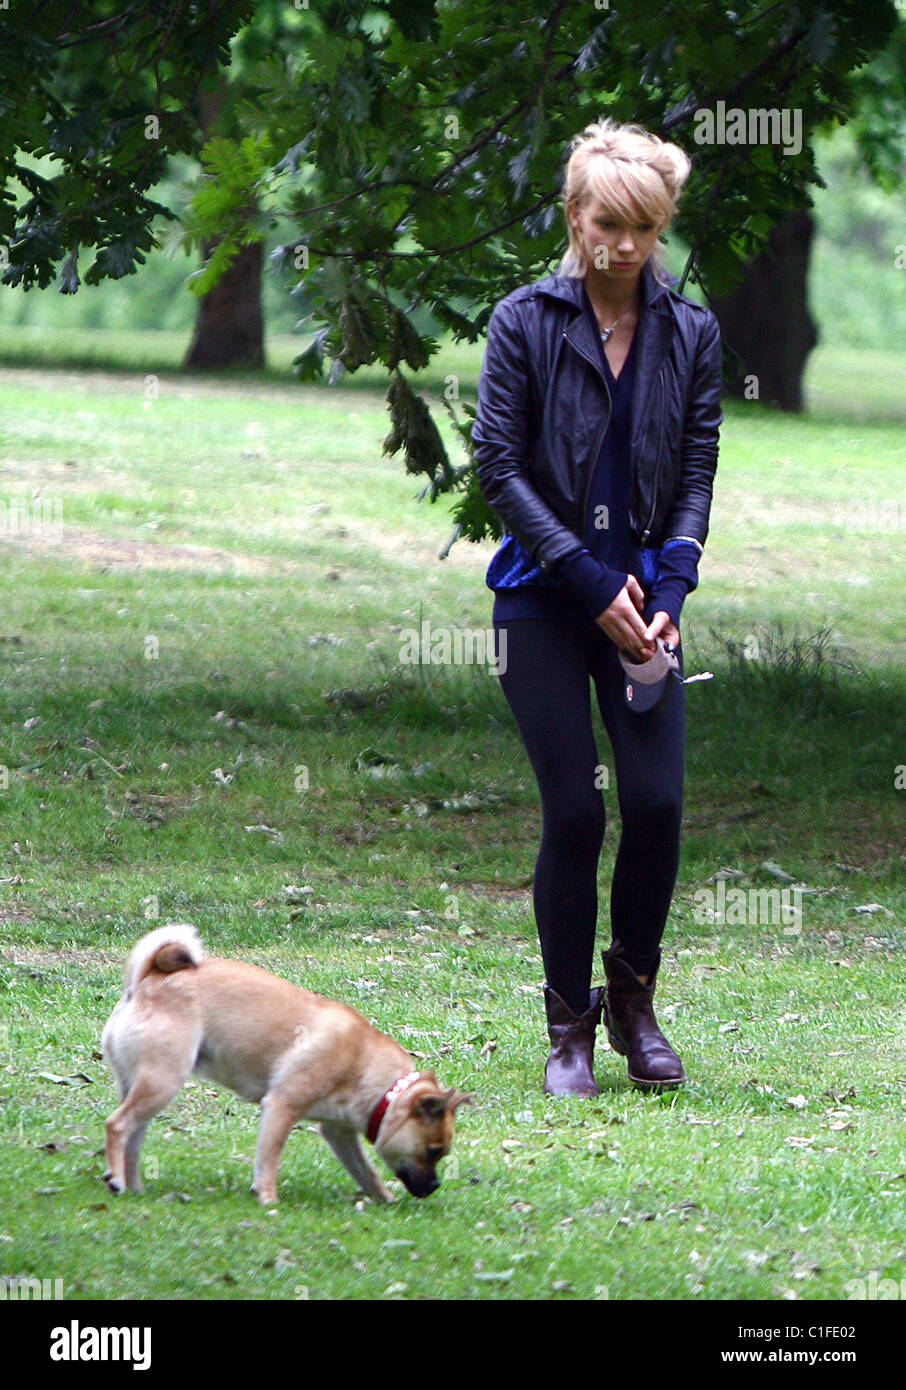 Ekaterina Ivanova plays with her dog in the park London, England - 14.05.09 Stock Photo